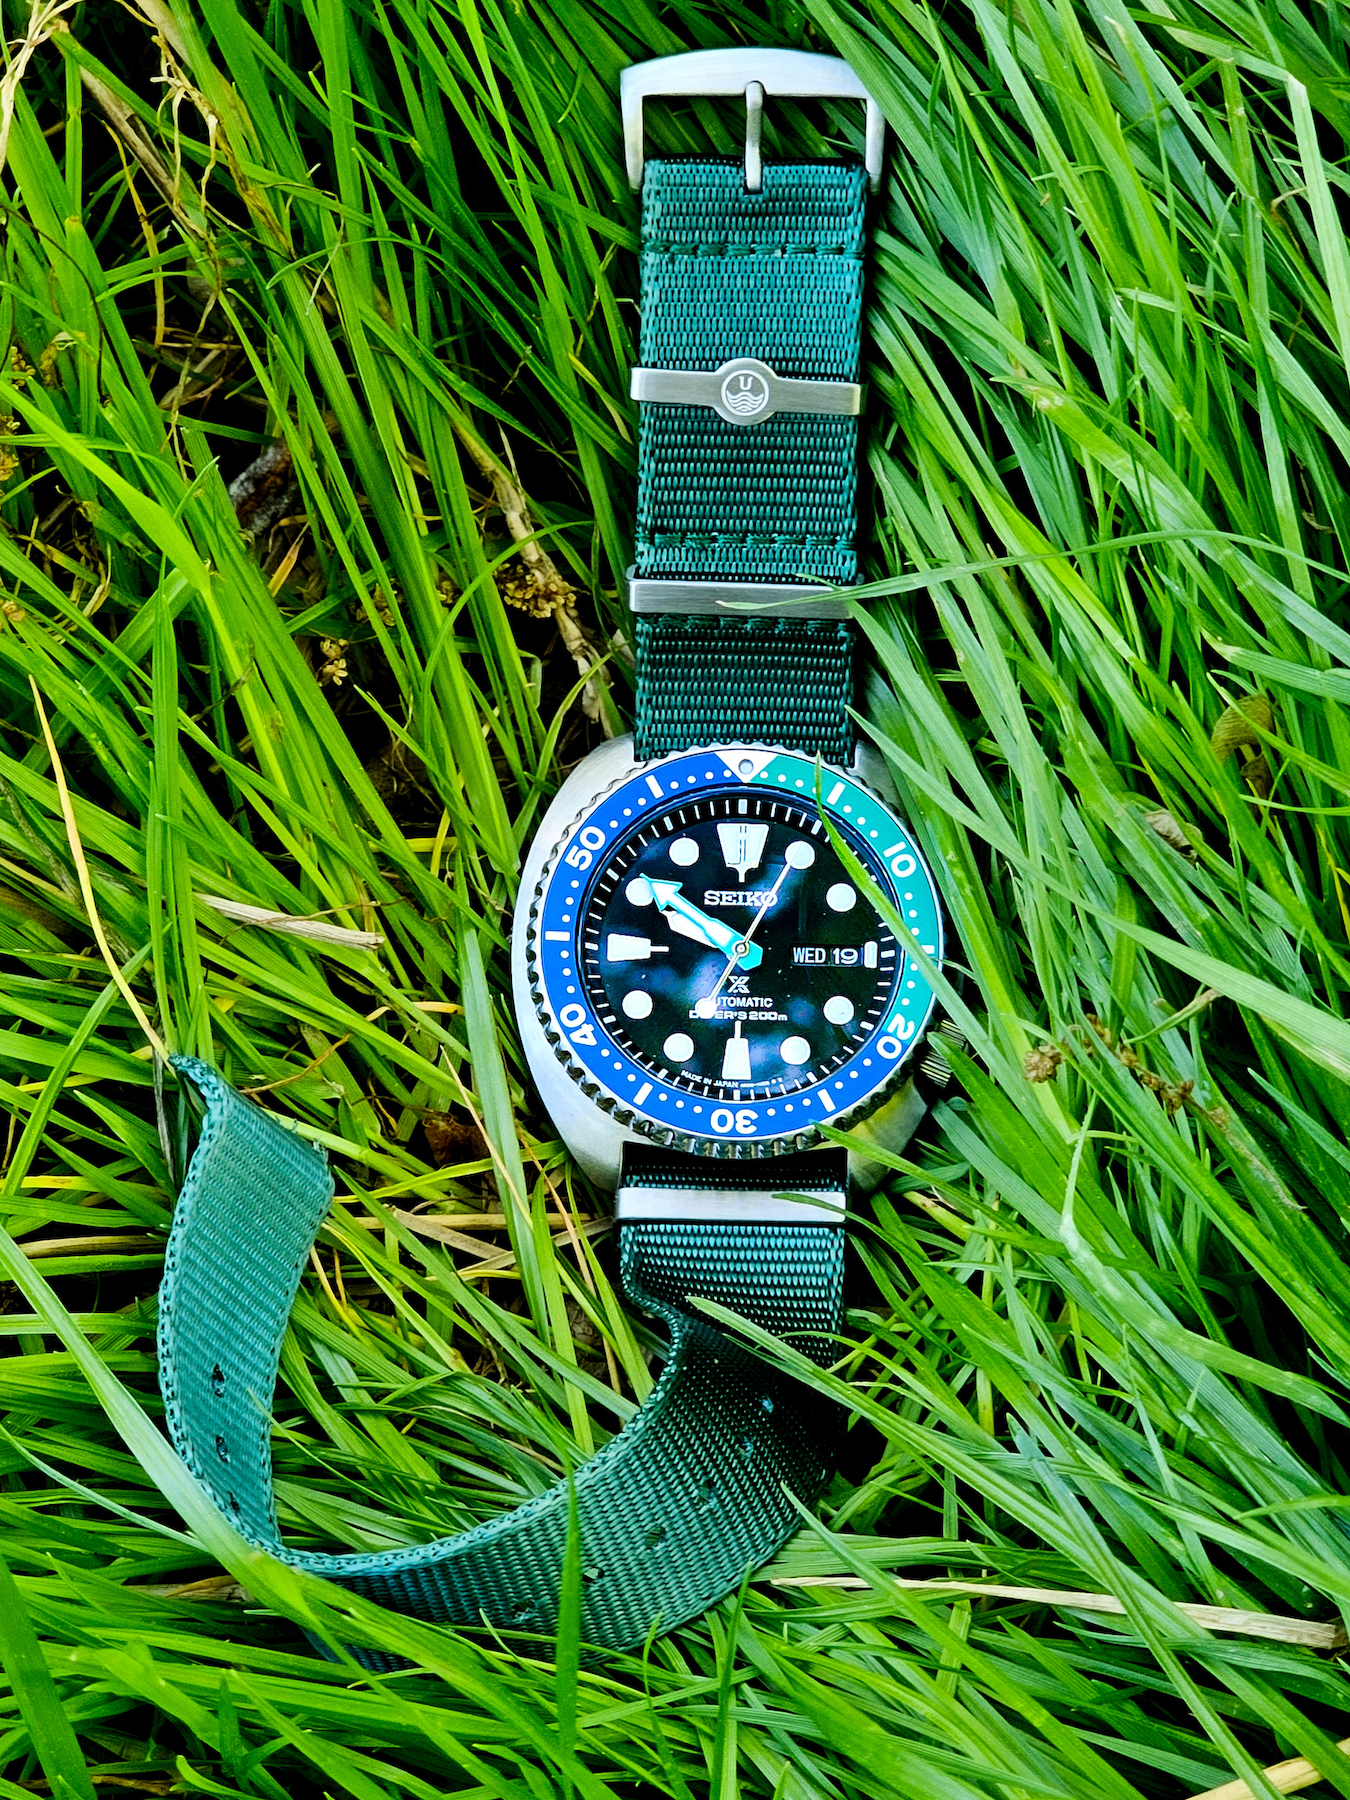 Why the Seiko Turtle could be your first good watch